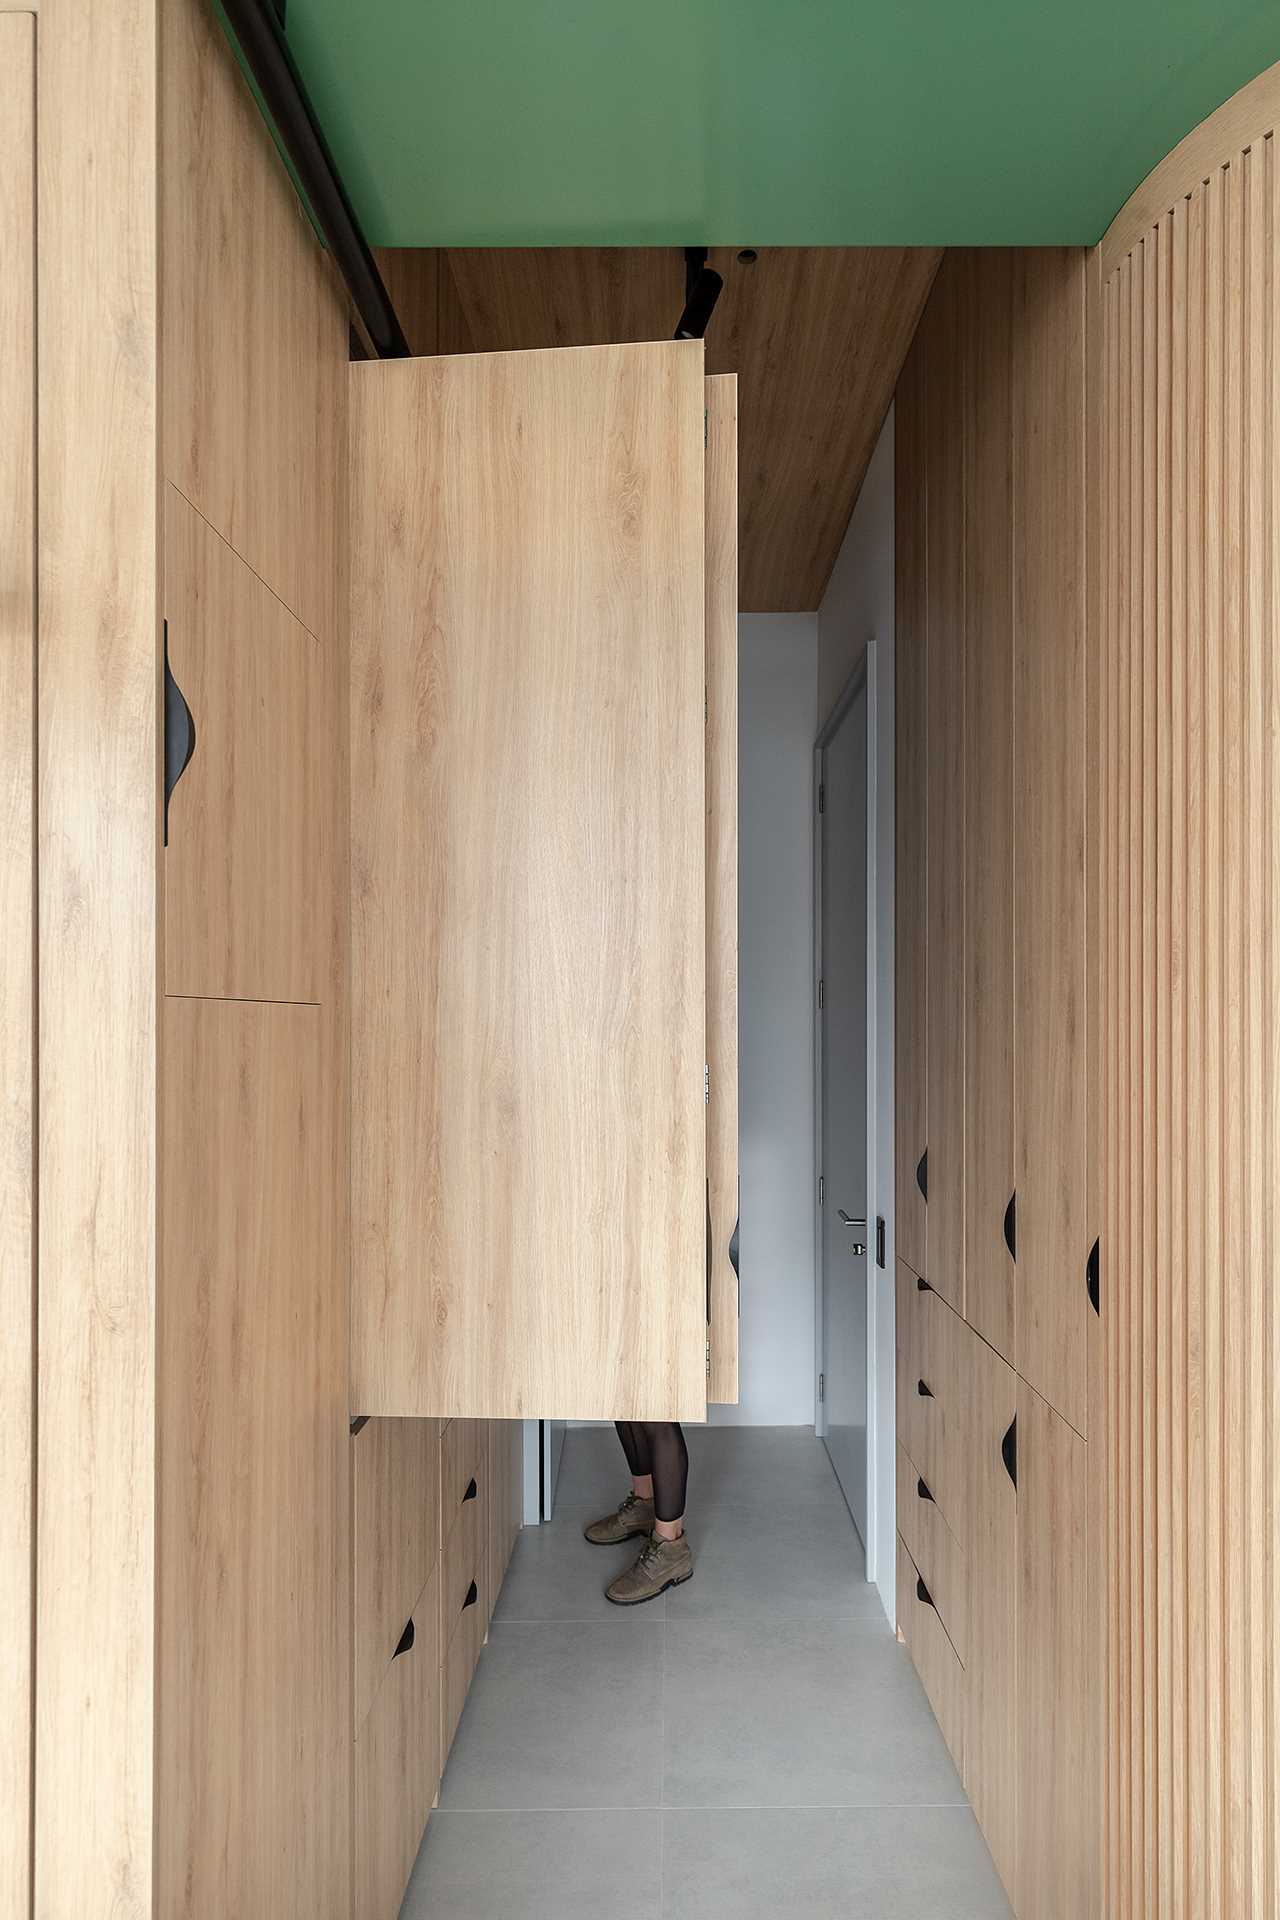 A small kitchen is hidden behind cabinet doors in the hallway of this small apartment.